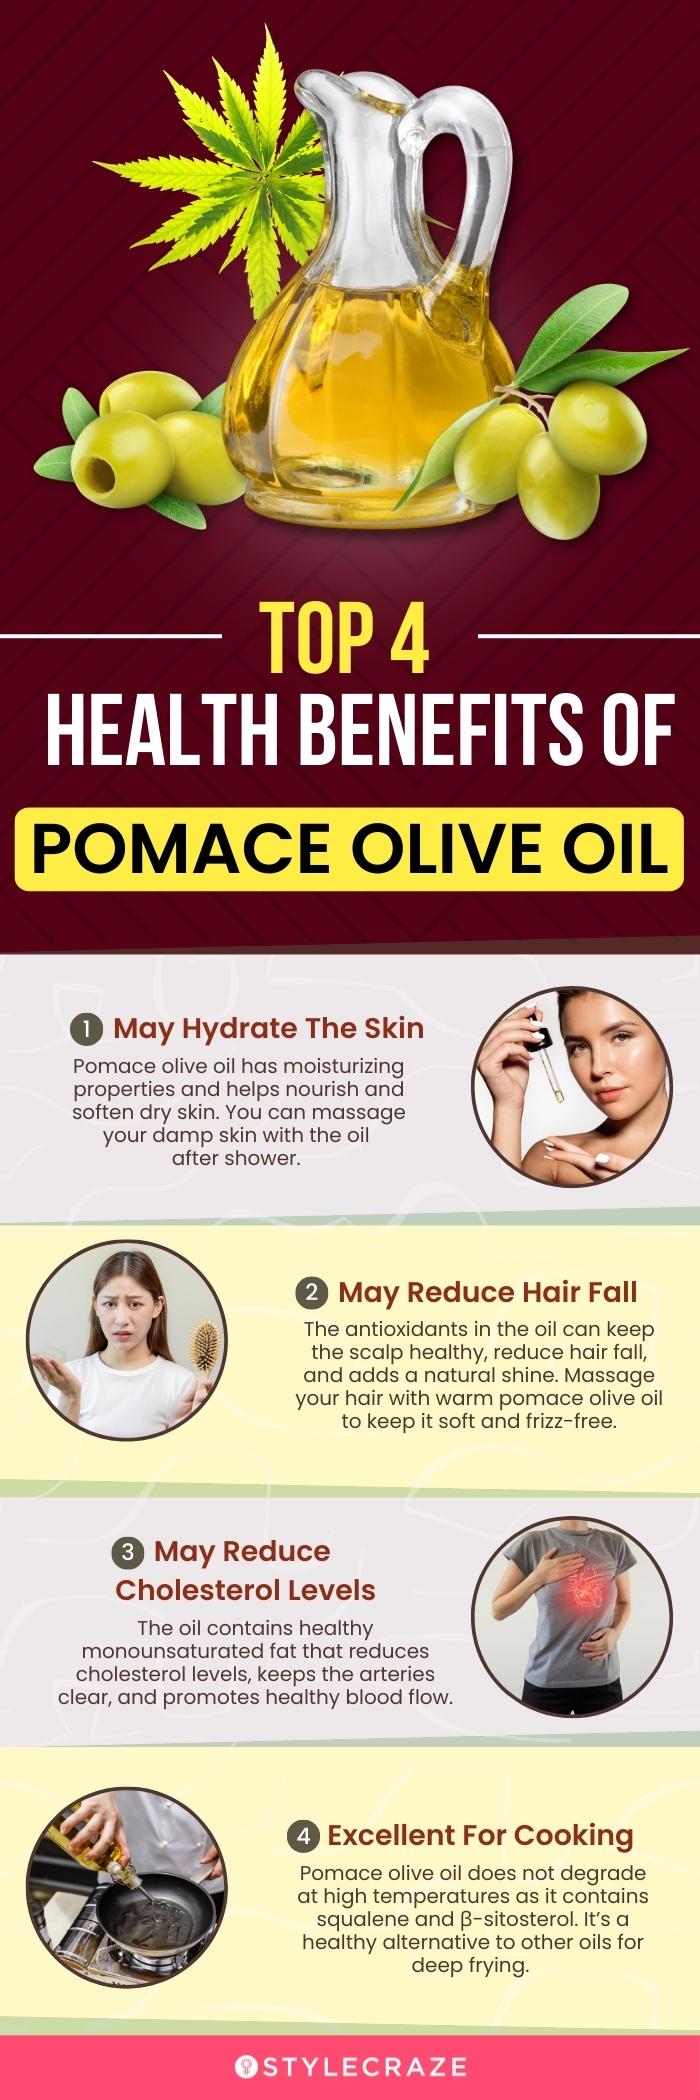 top 4 health benefits of pomace olive oil (infographic)